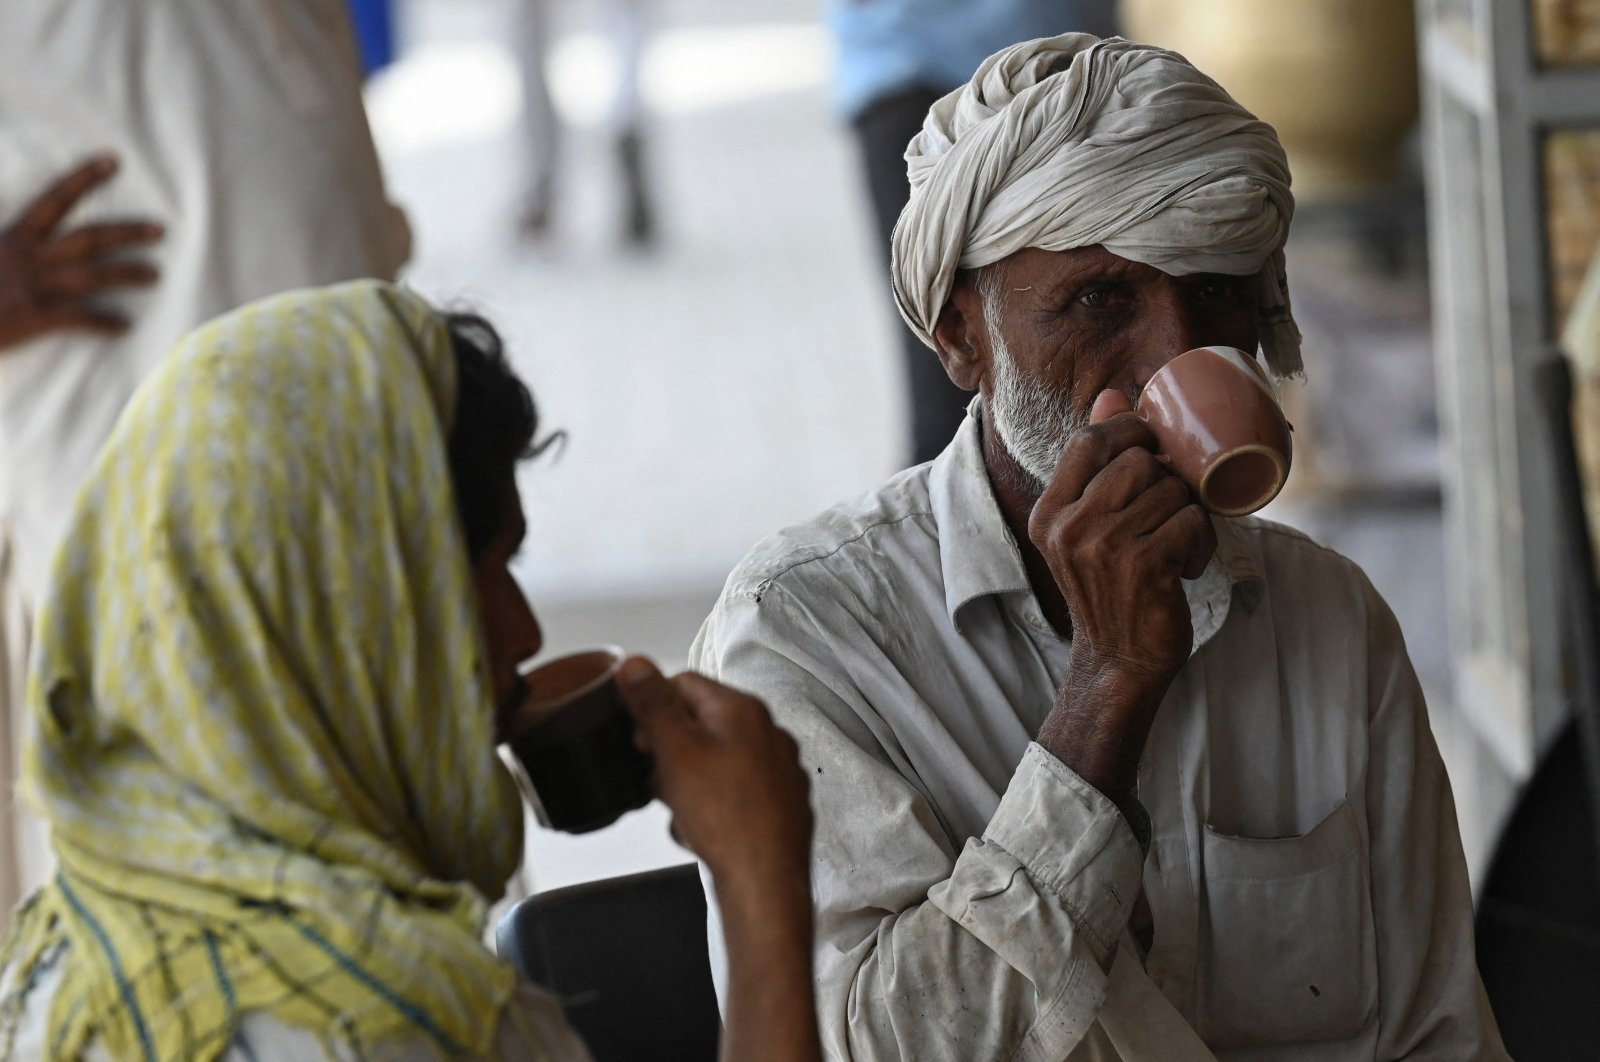 Men drink a cup of tea at a roadside restaurant in Islamabad, Pakistan, June 15, 2022. (AFP Photo)